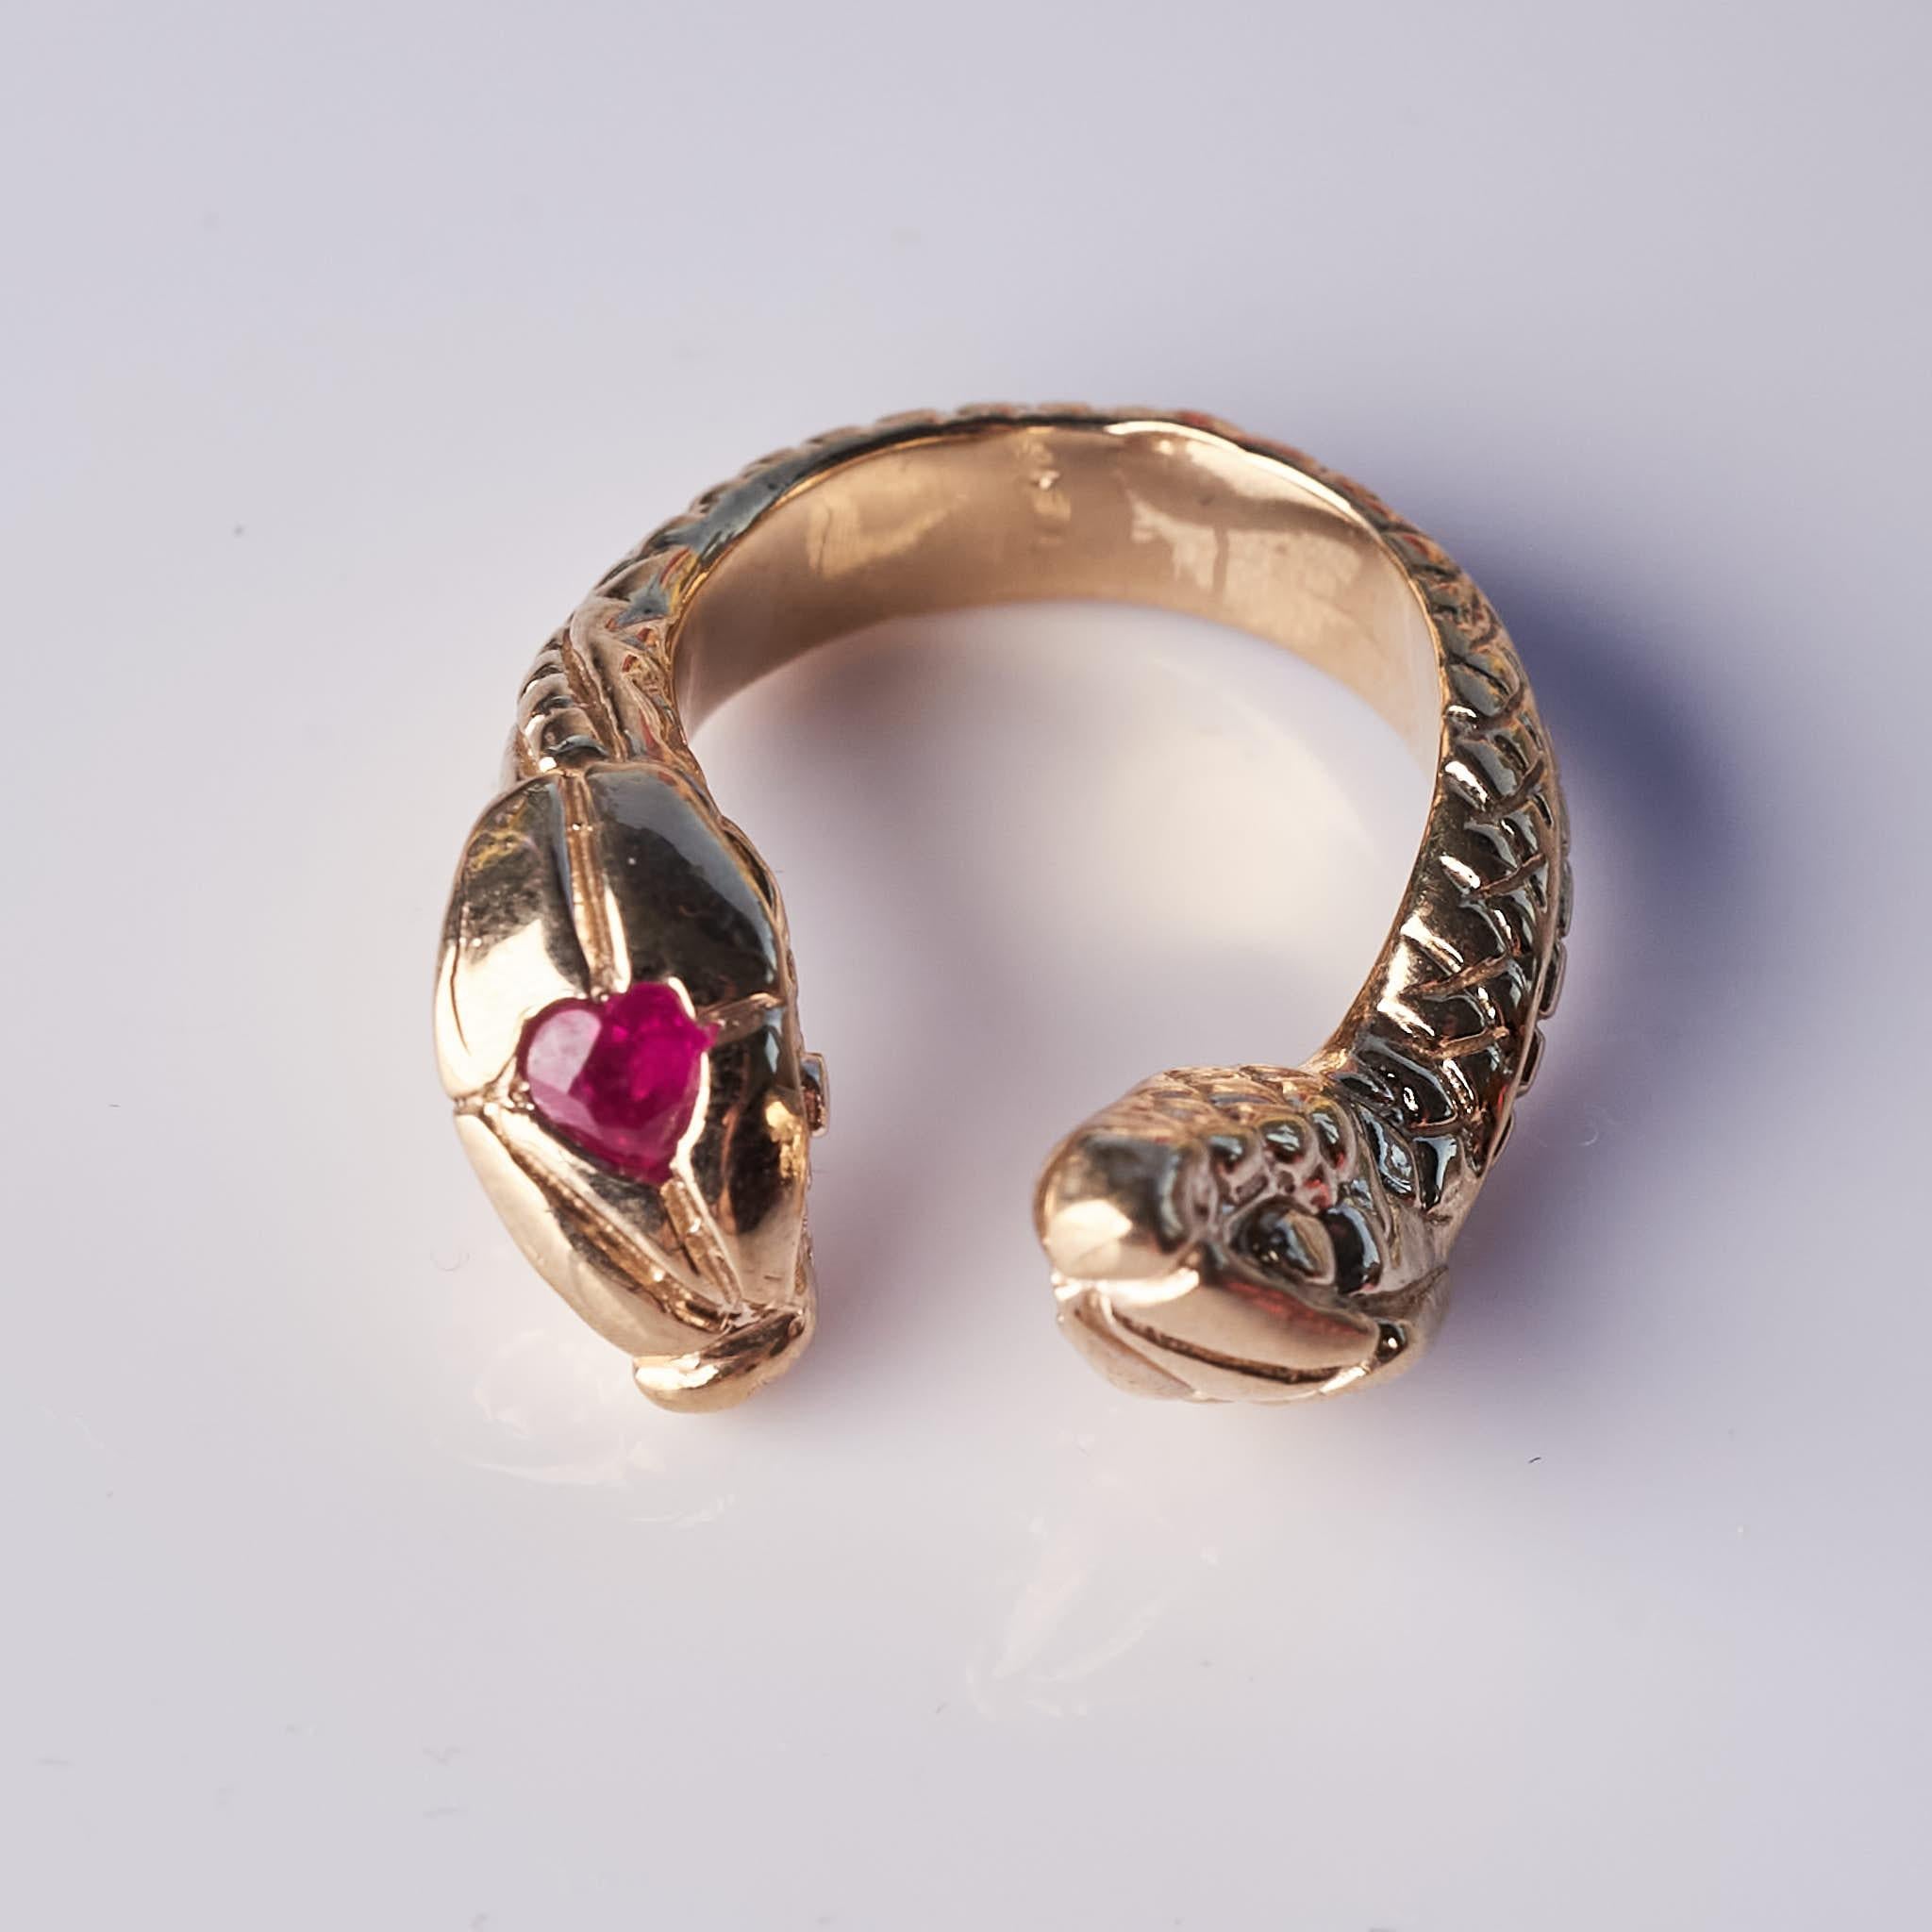 Heart Ruby Snake Ring Cocktail Ring Bronze J Dauphin
Perfect for Valentine Jewelry

This ring has one large  Heart Ruby on the head of one snake. Its a great gift as it is adjustable - and you can use on any finger and just squeeze it on your